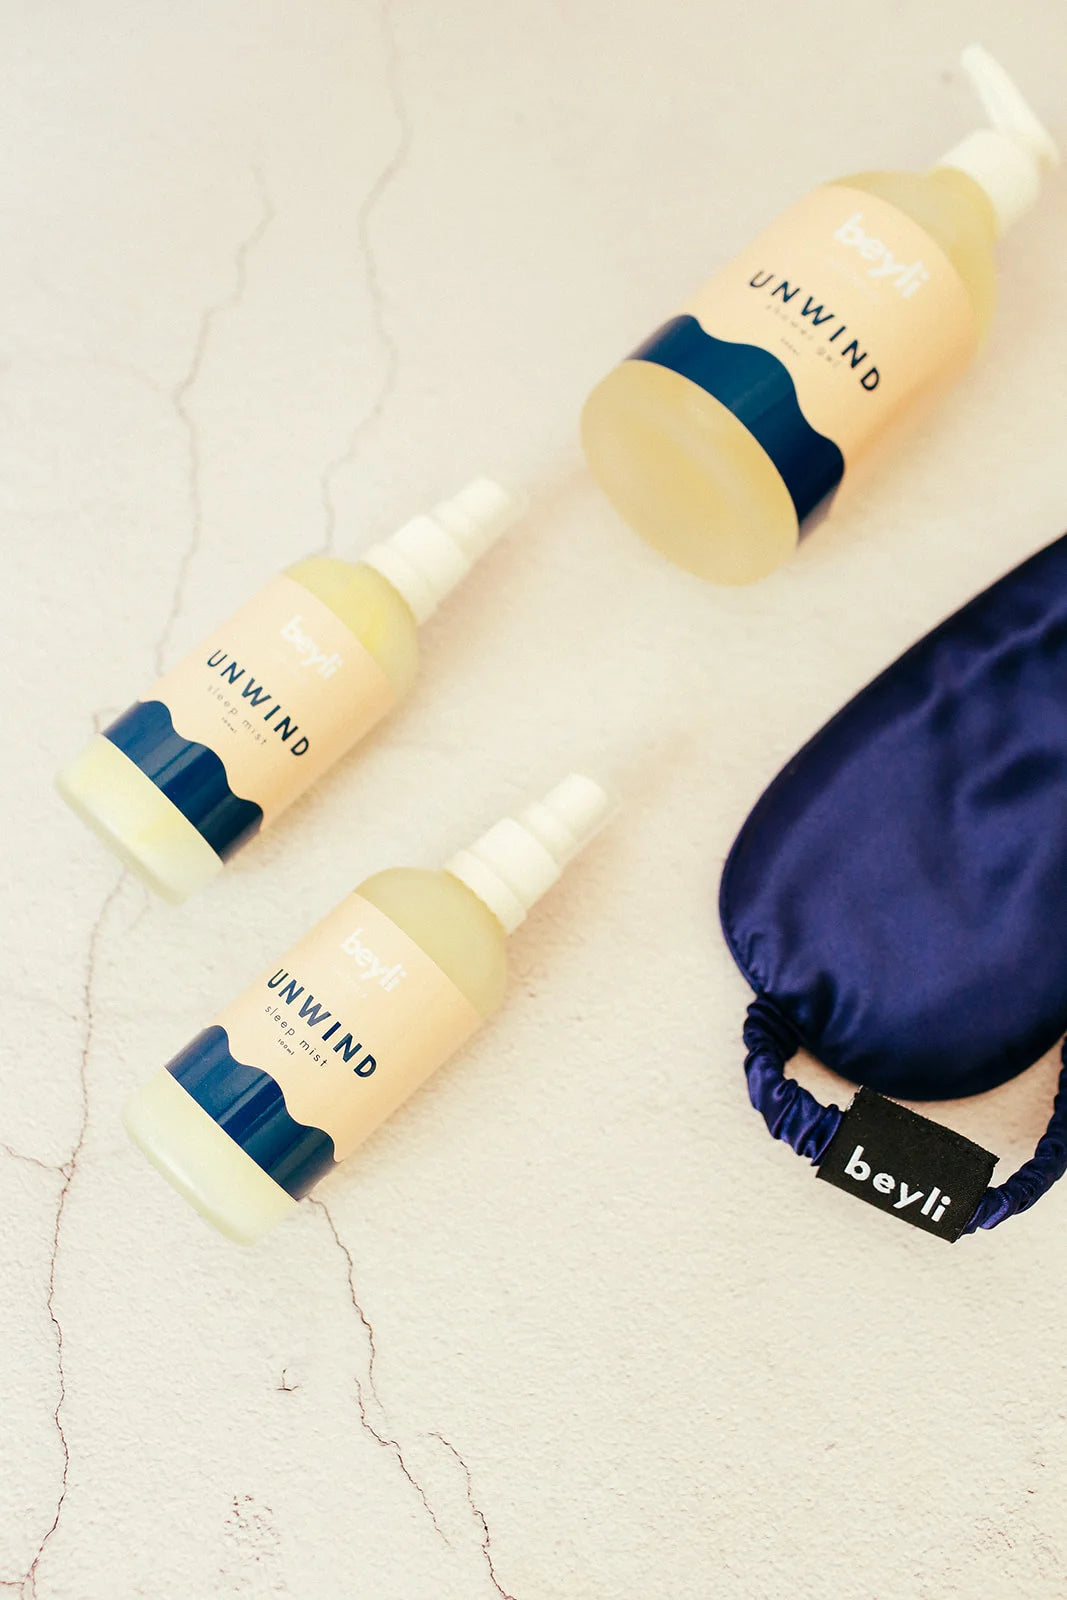 Sleep Bundle Essentials collection including hand sanitizer, tote bag, and hand lotion